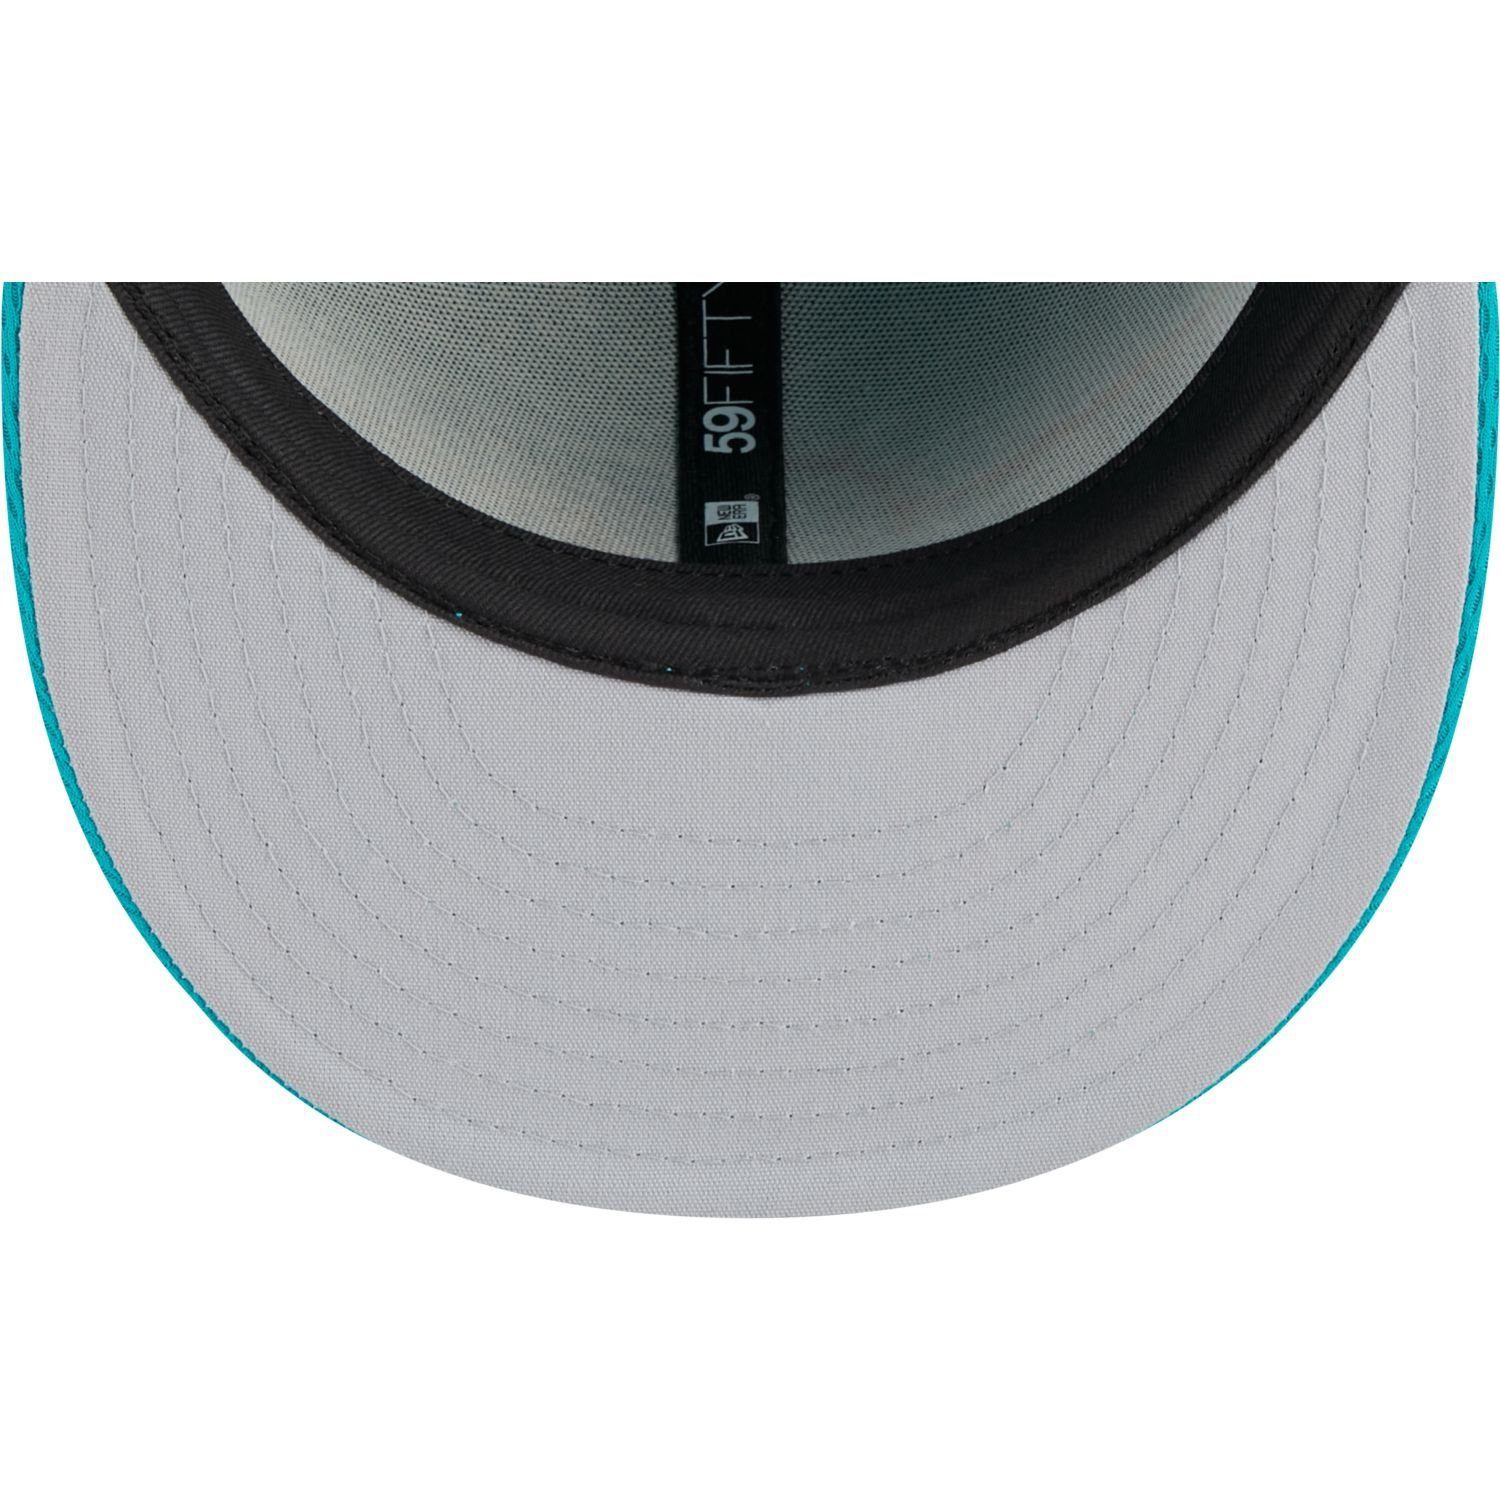 NFL Fitted Era Cap Dolphins New 59Fifty TRAINING Miami